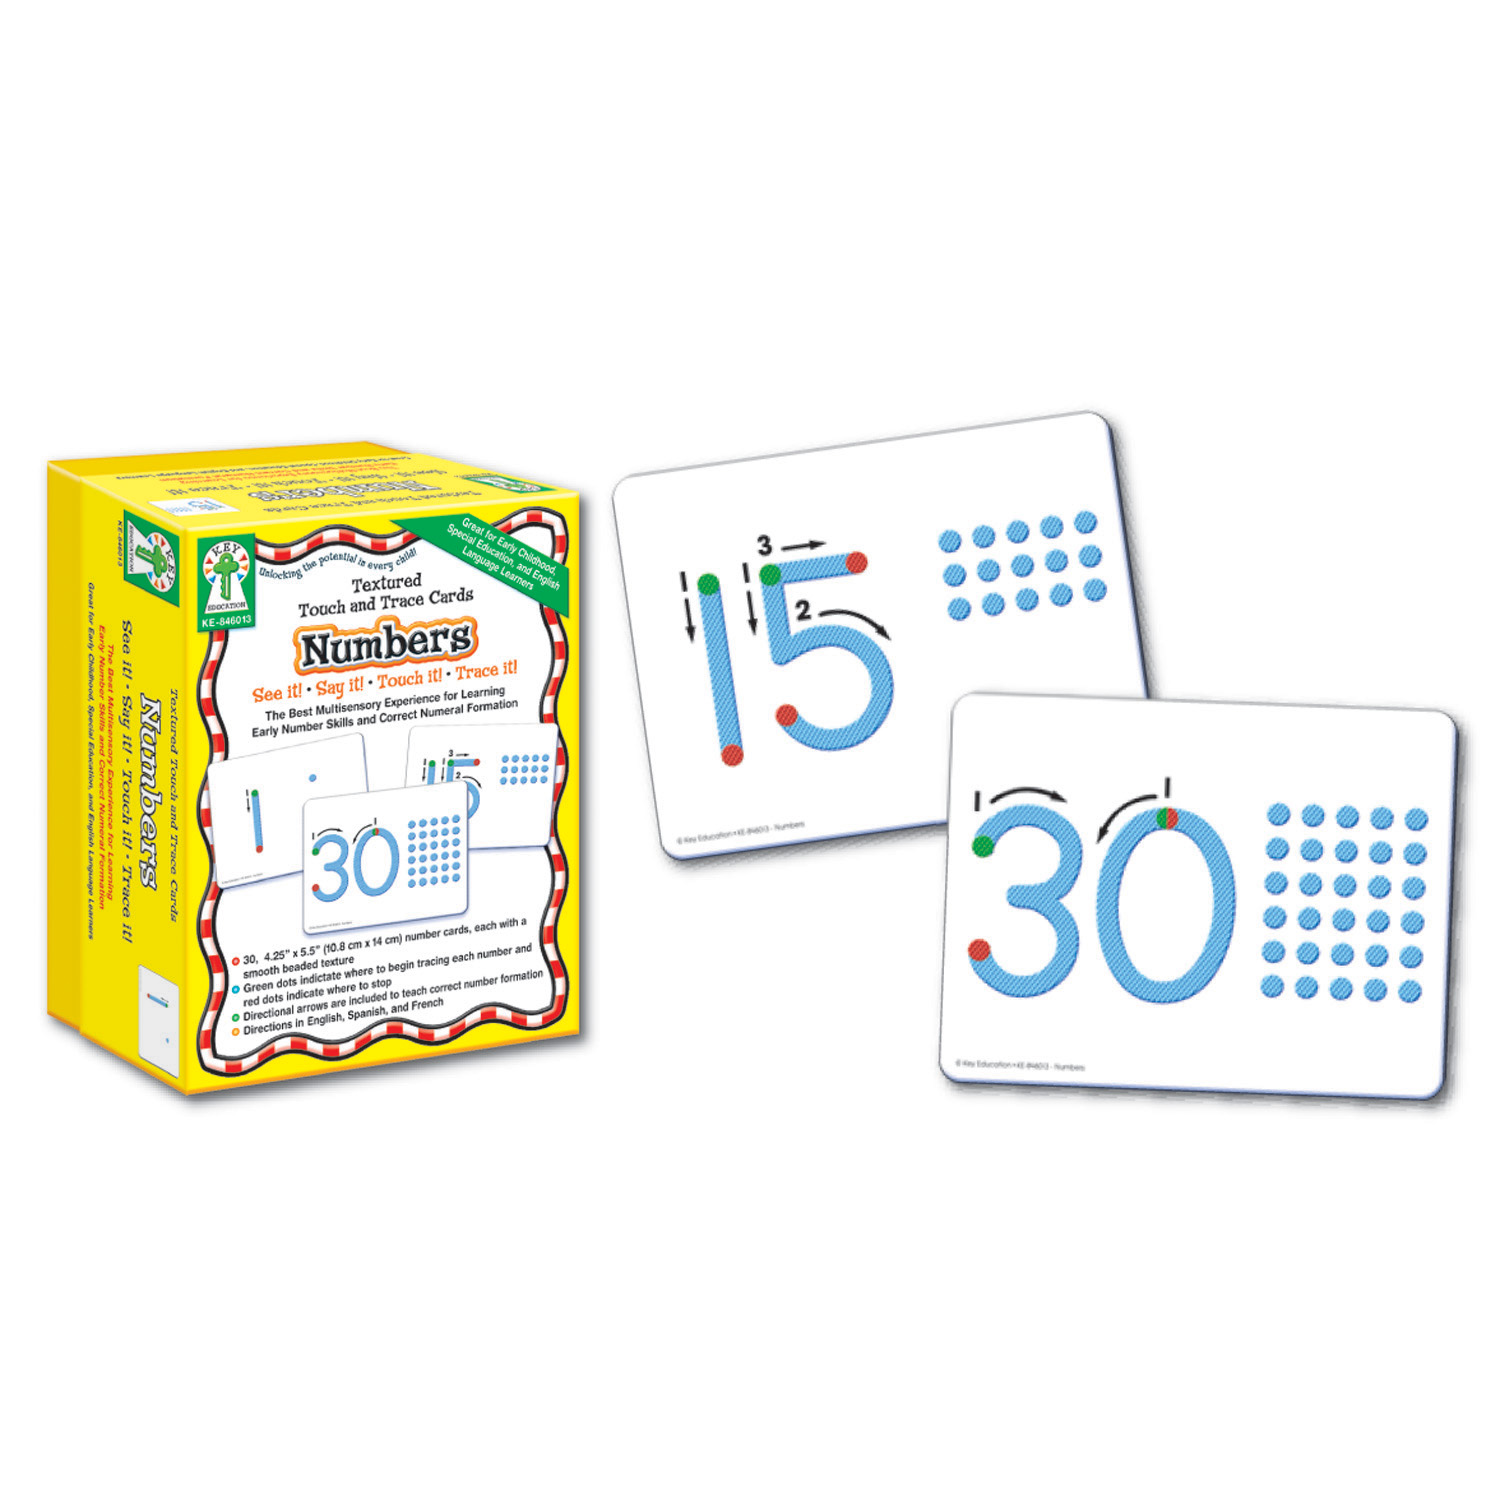 Carson Dellosa Education Textured Touch and Trace Cards: Numbers, Grade PK-3